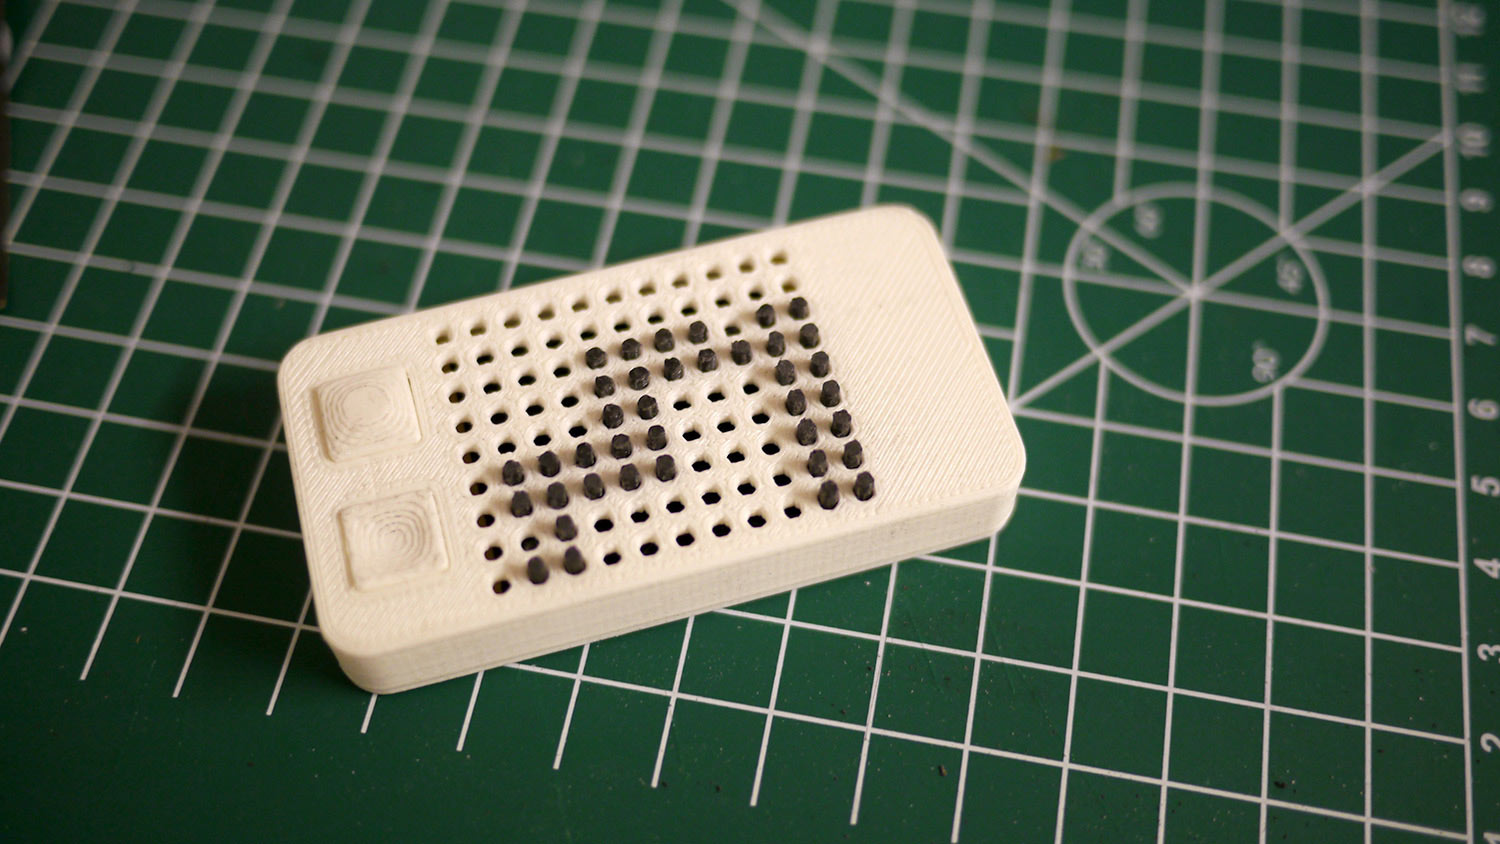 picture of the 3D printed prototype we use for user testing.